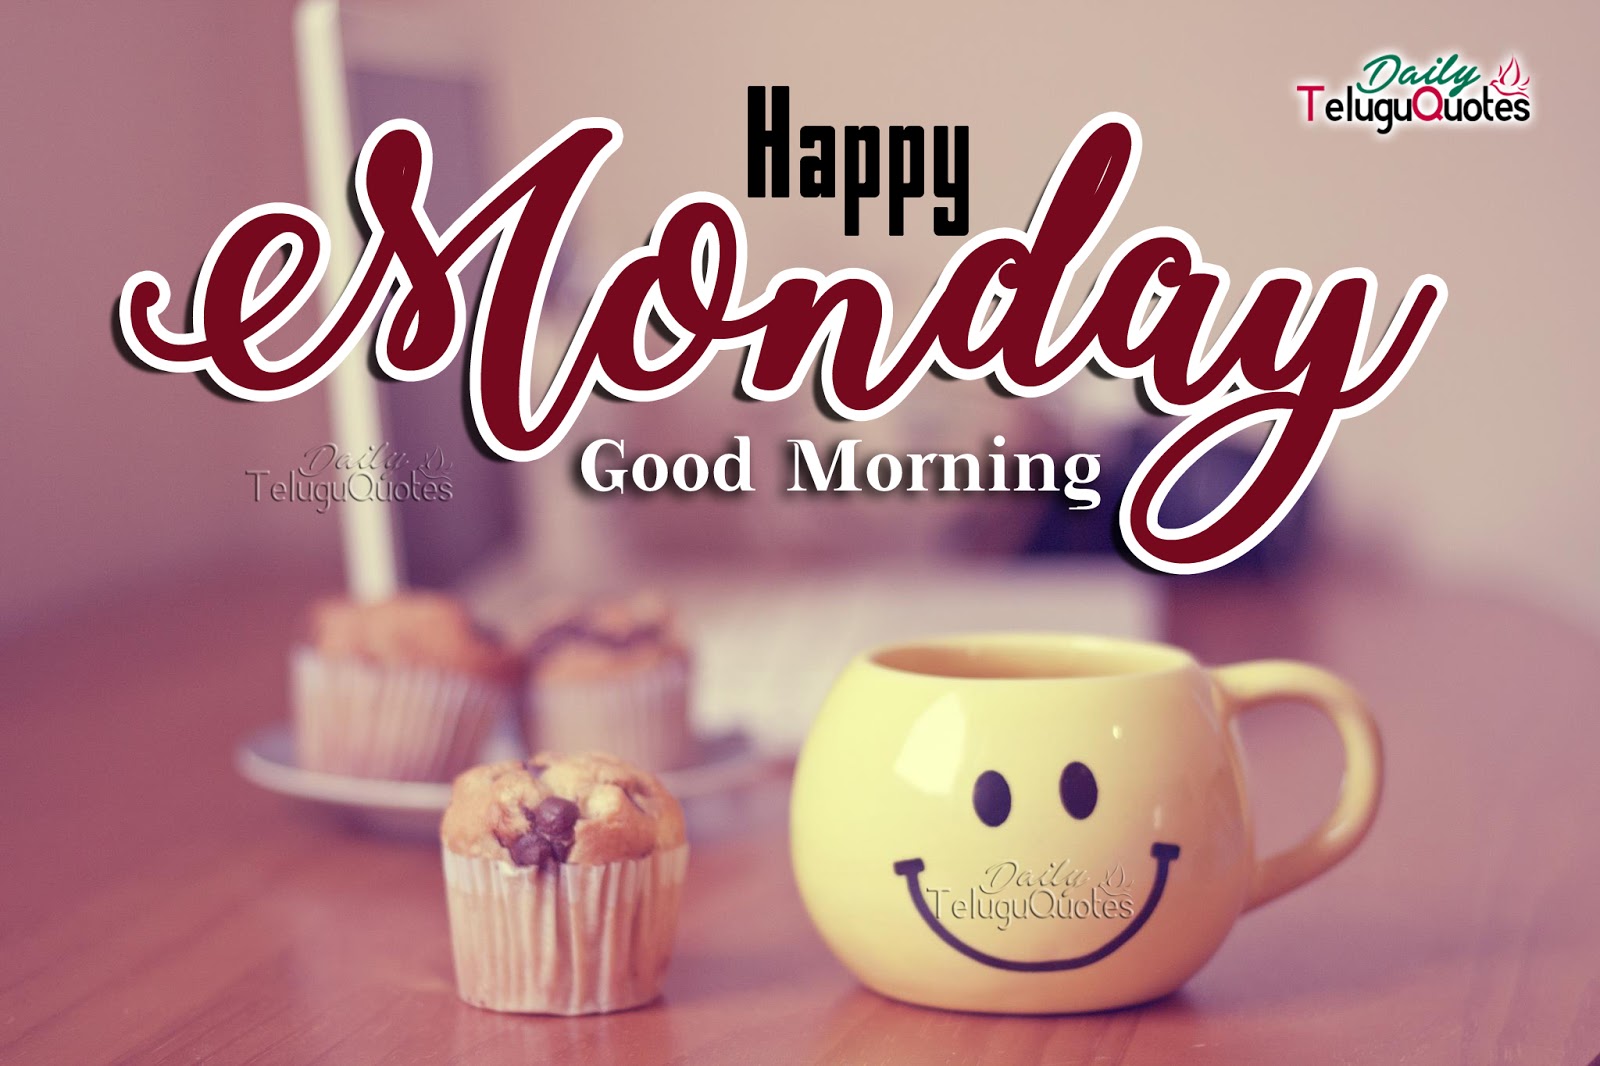 Good Morning Happy Monday Images Pictures Quotes Wallpapers - Good Morning Monday Wishes Hd , HD Wallpaper & Backgrounds